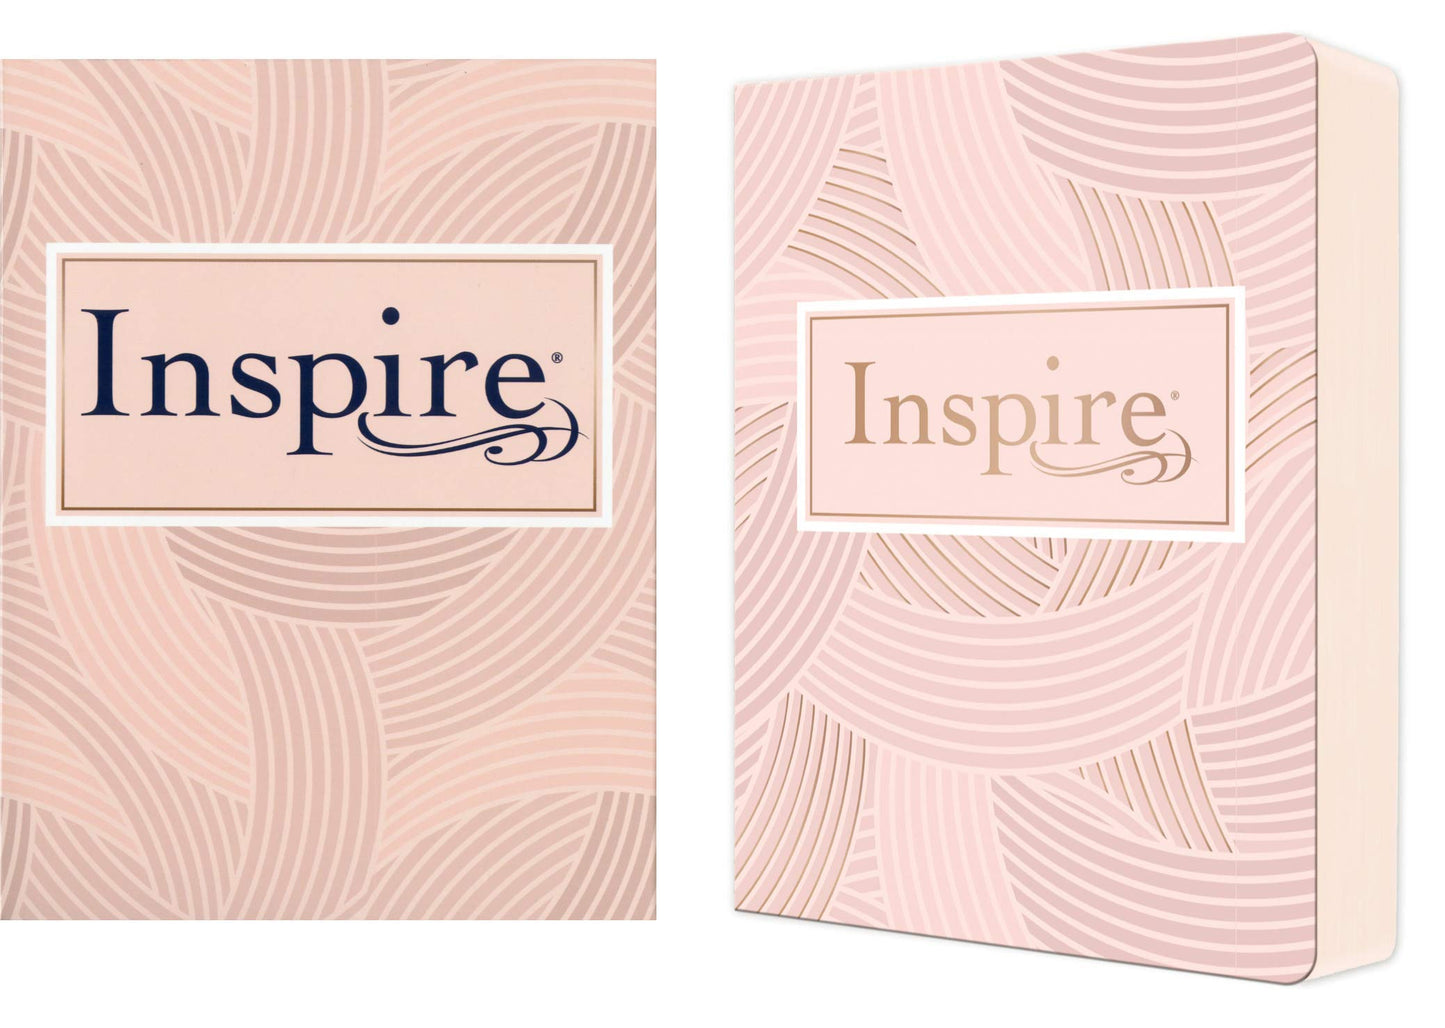 Inspire Bible NLT (Softcover, Pink): The Bible for Coloring & Creative Journaling